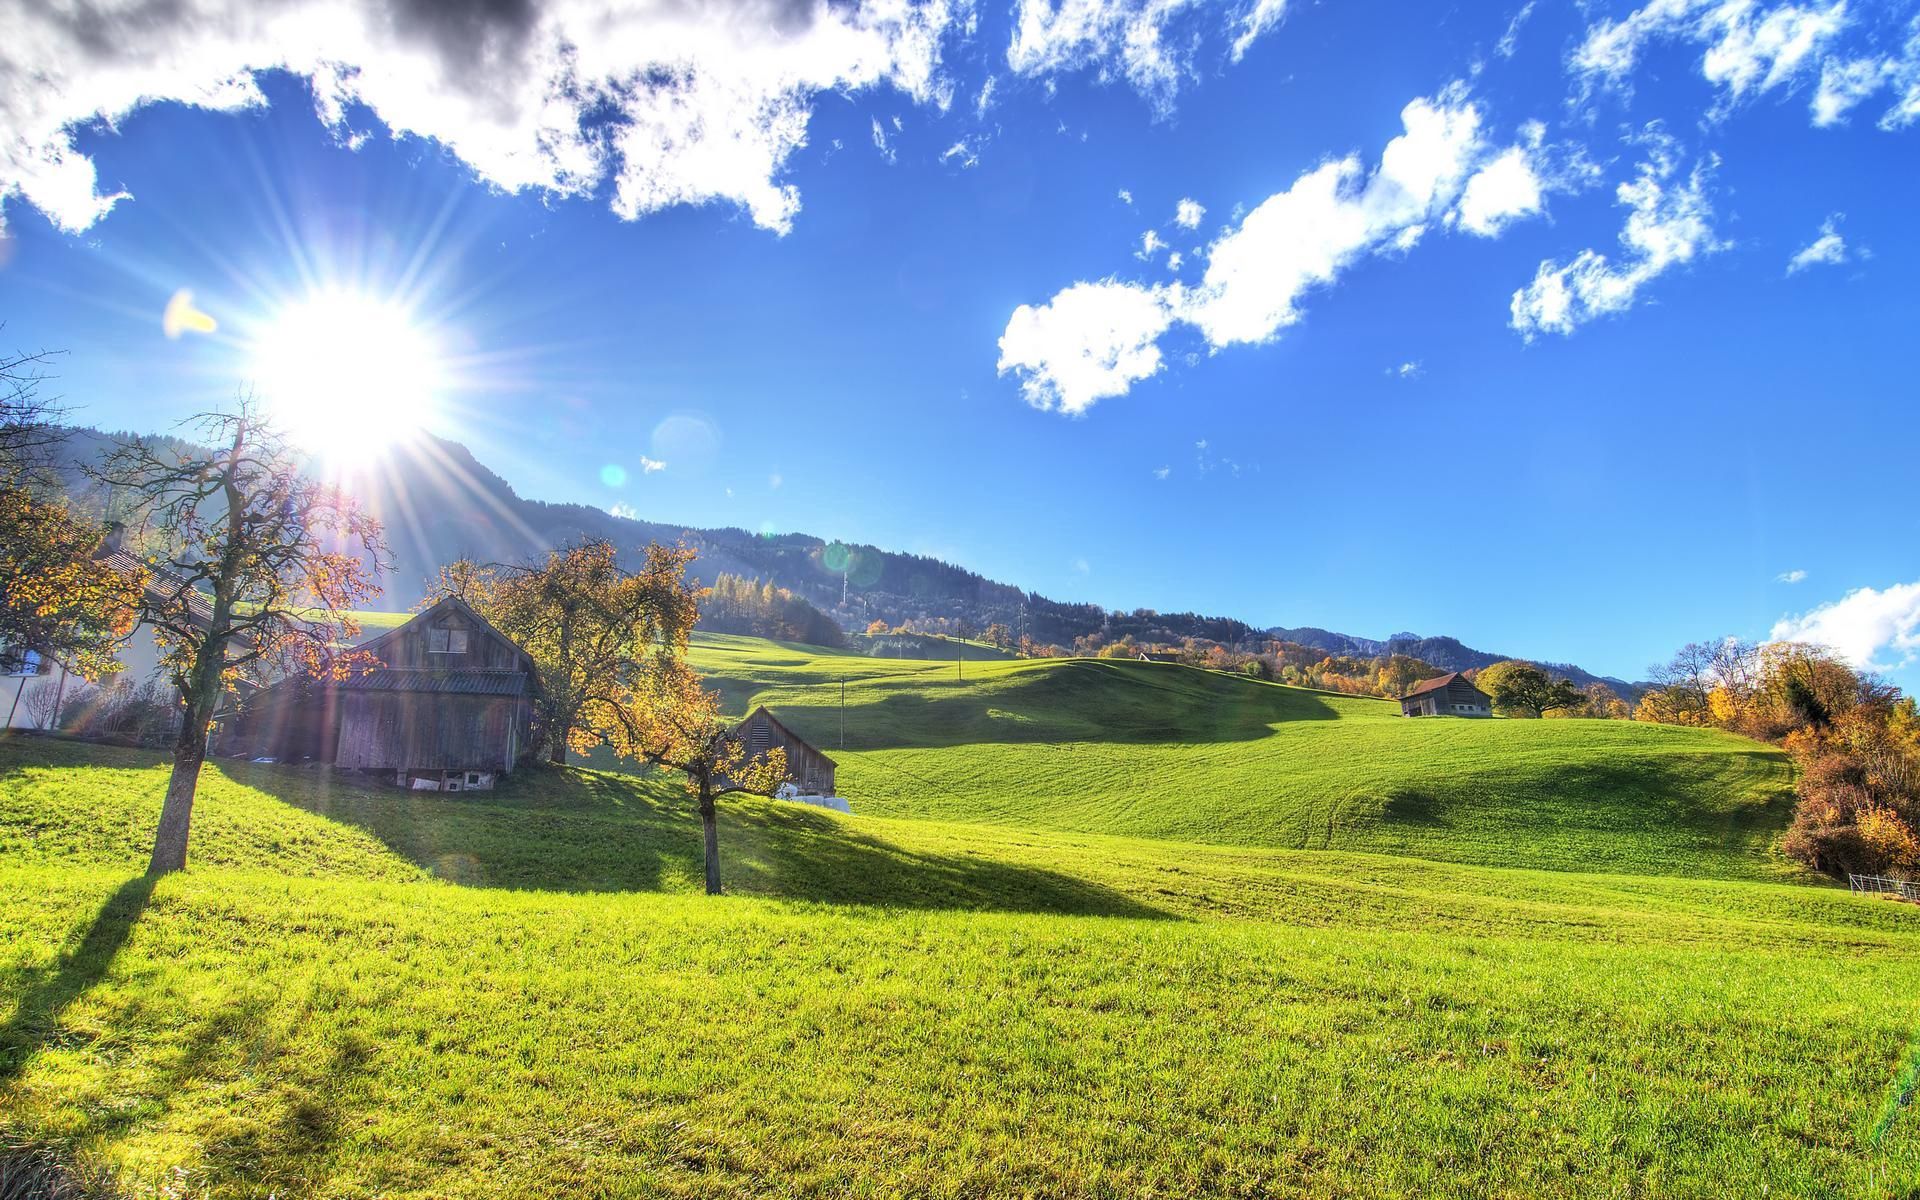 small house, fields, lodge, nature, shine, lawn, warmth, autumn, sun, light, beams, rays, heat, slopes, lawns, indian summer images